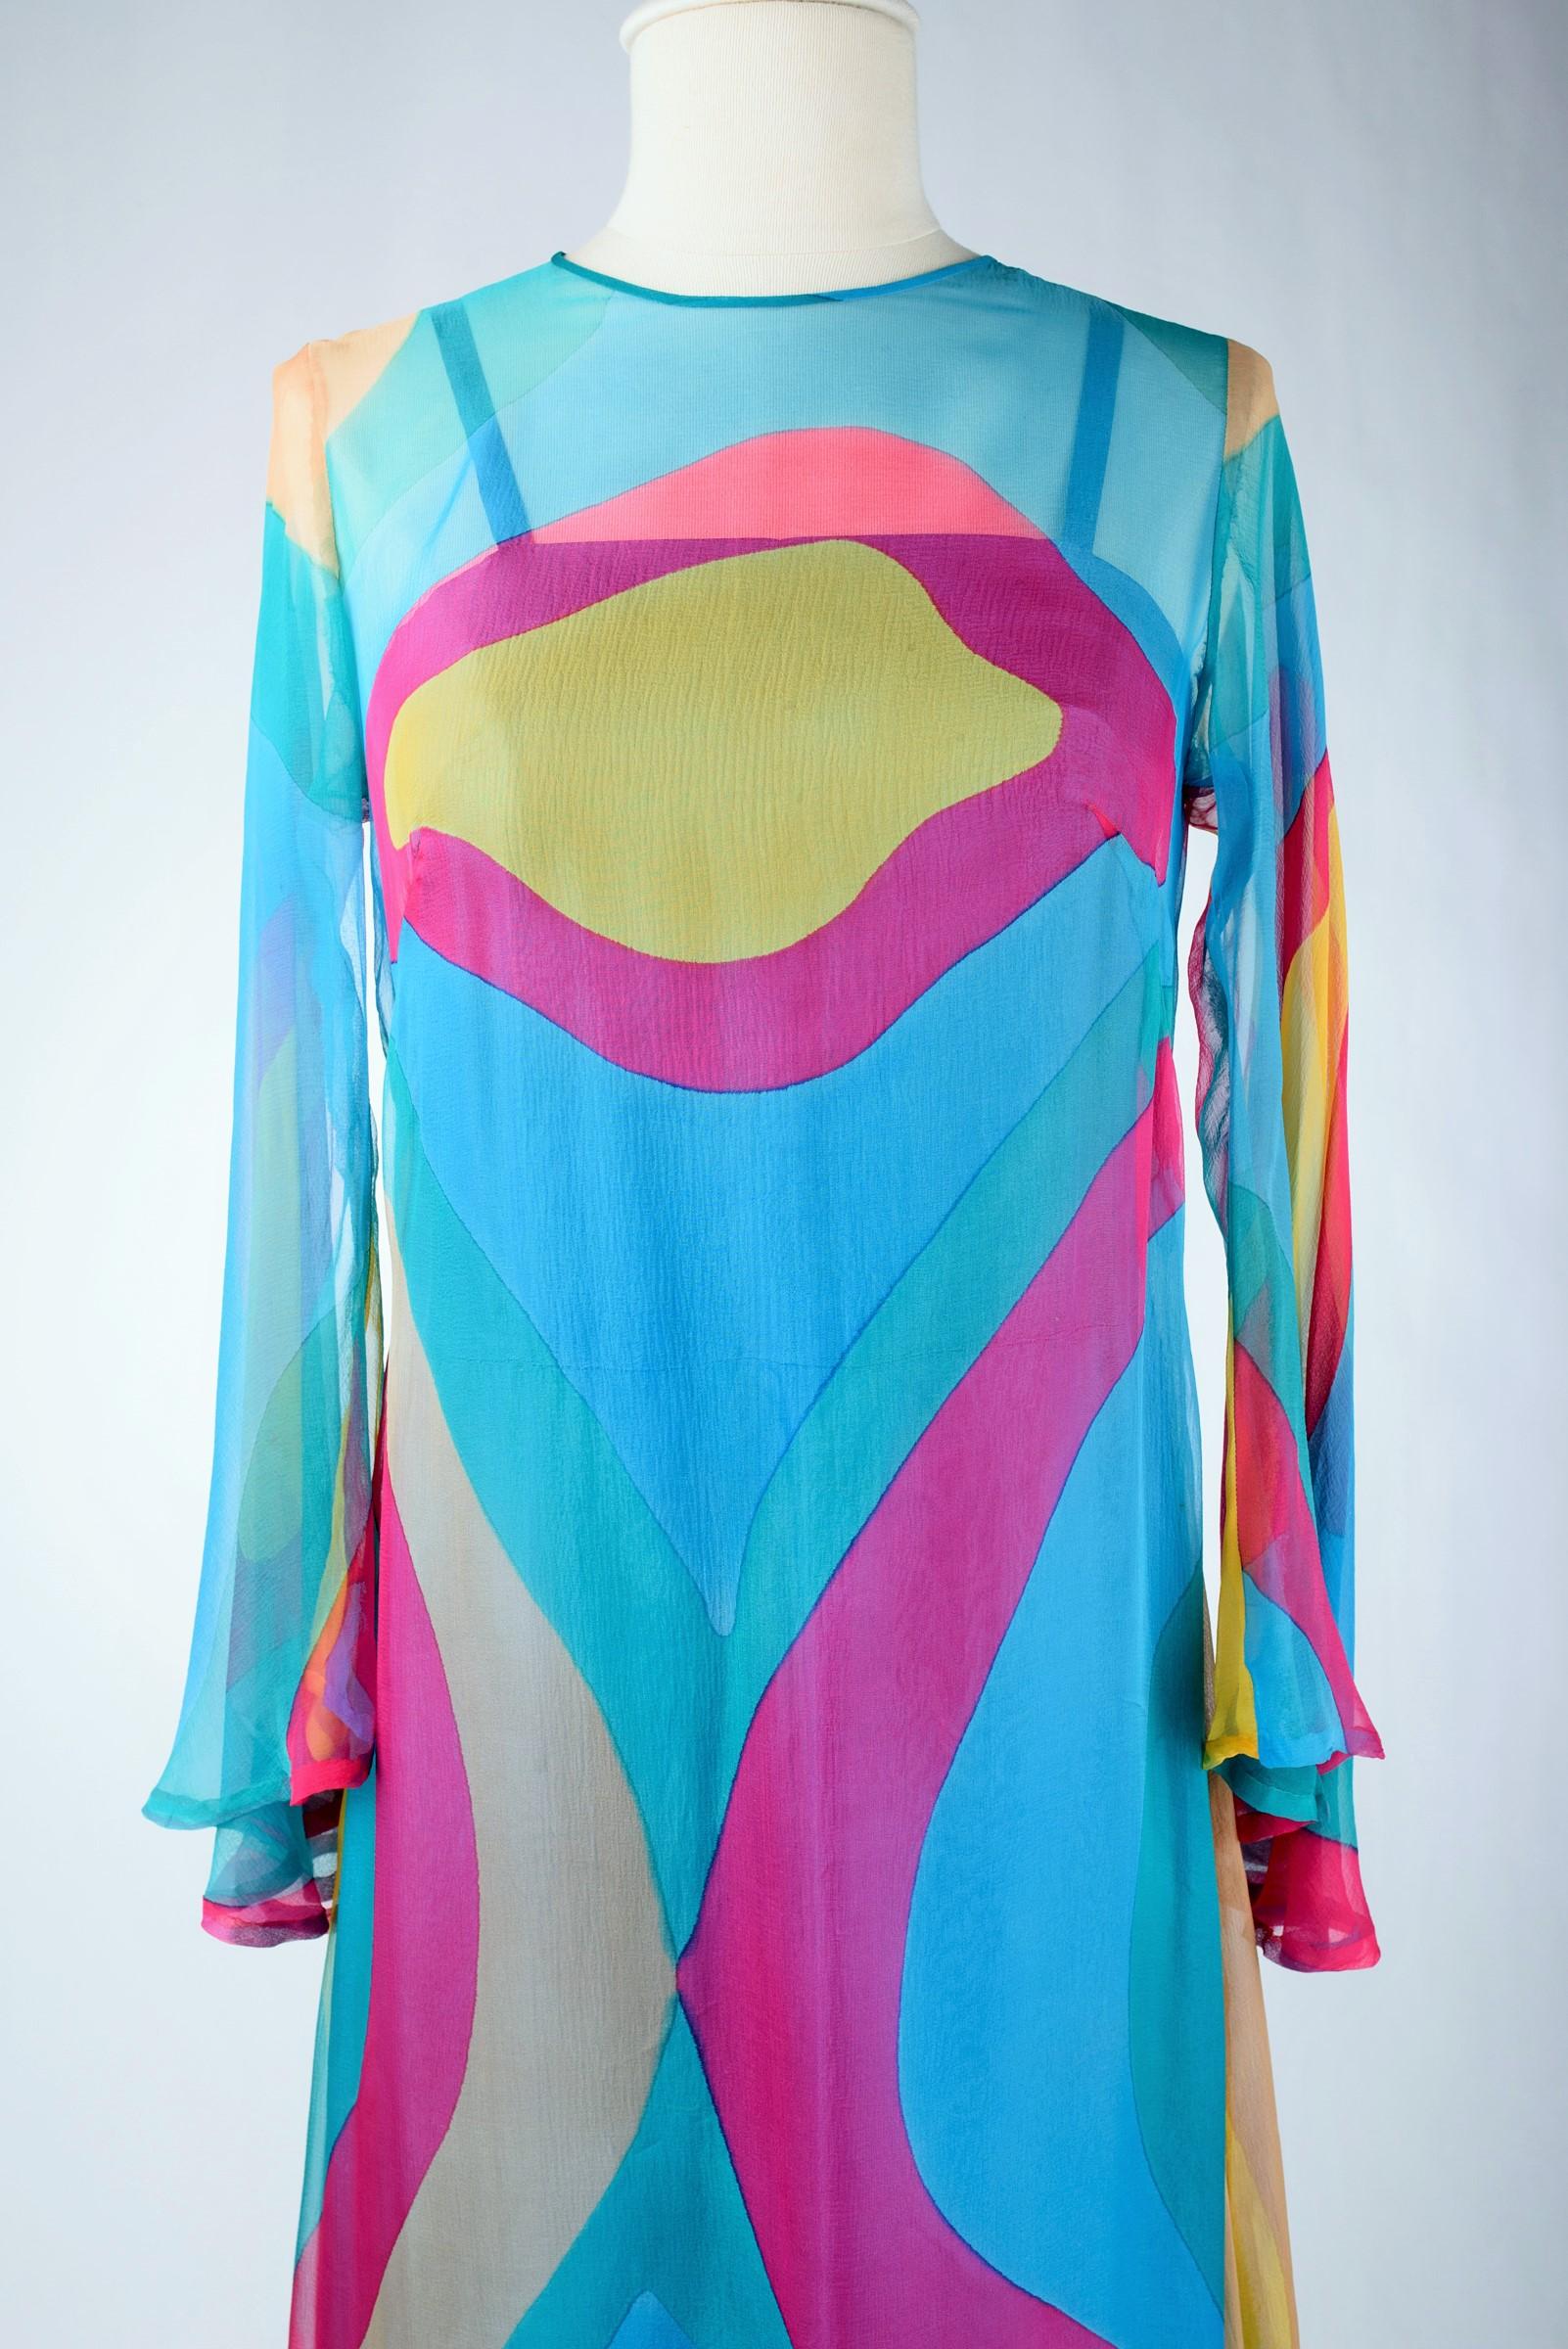 Circa 1970-1975

France

Magistral long dress in printed silk crepe, without claw and dating from the 1970s. Chasuble cut dress with psychedelic print typical of Pop Art of this period. Translucent silk crepe with large concentric circles in shades